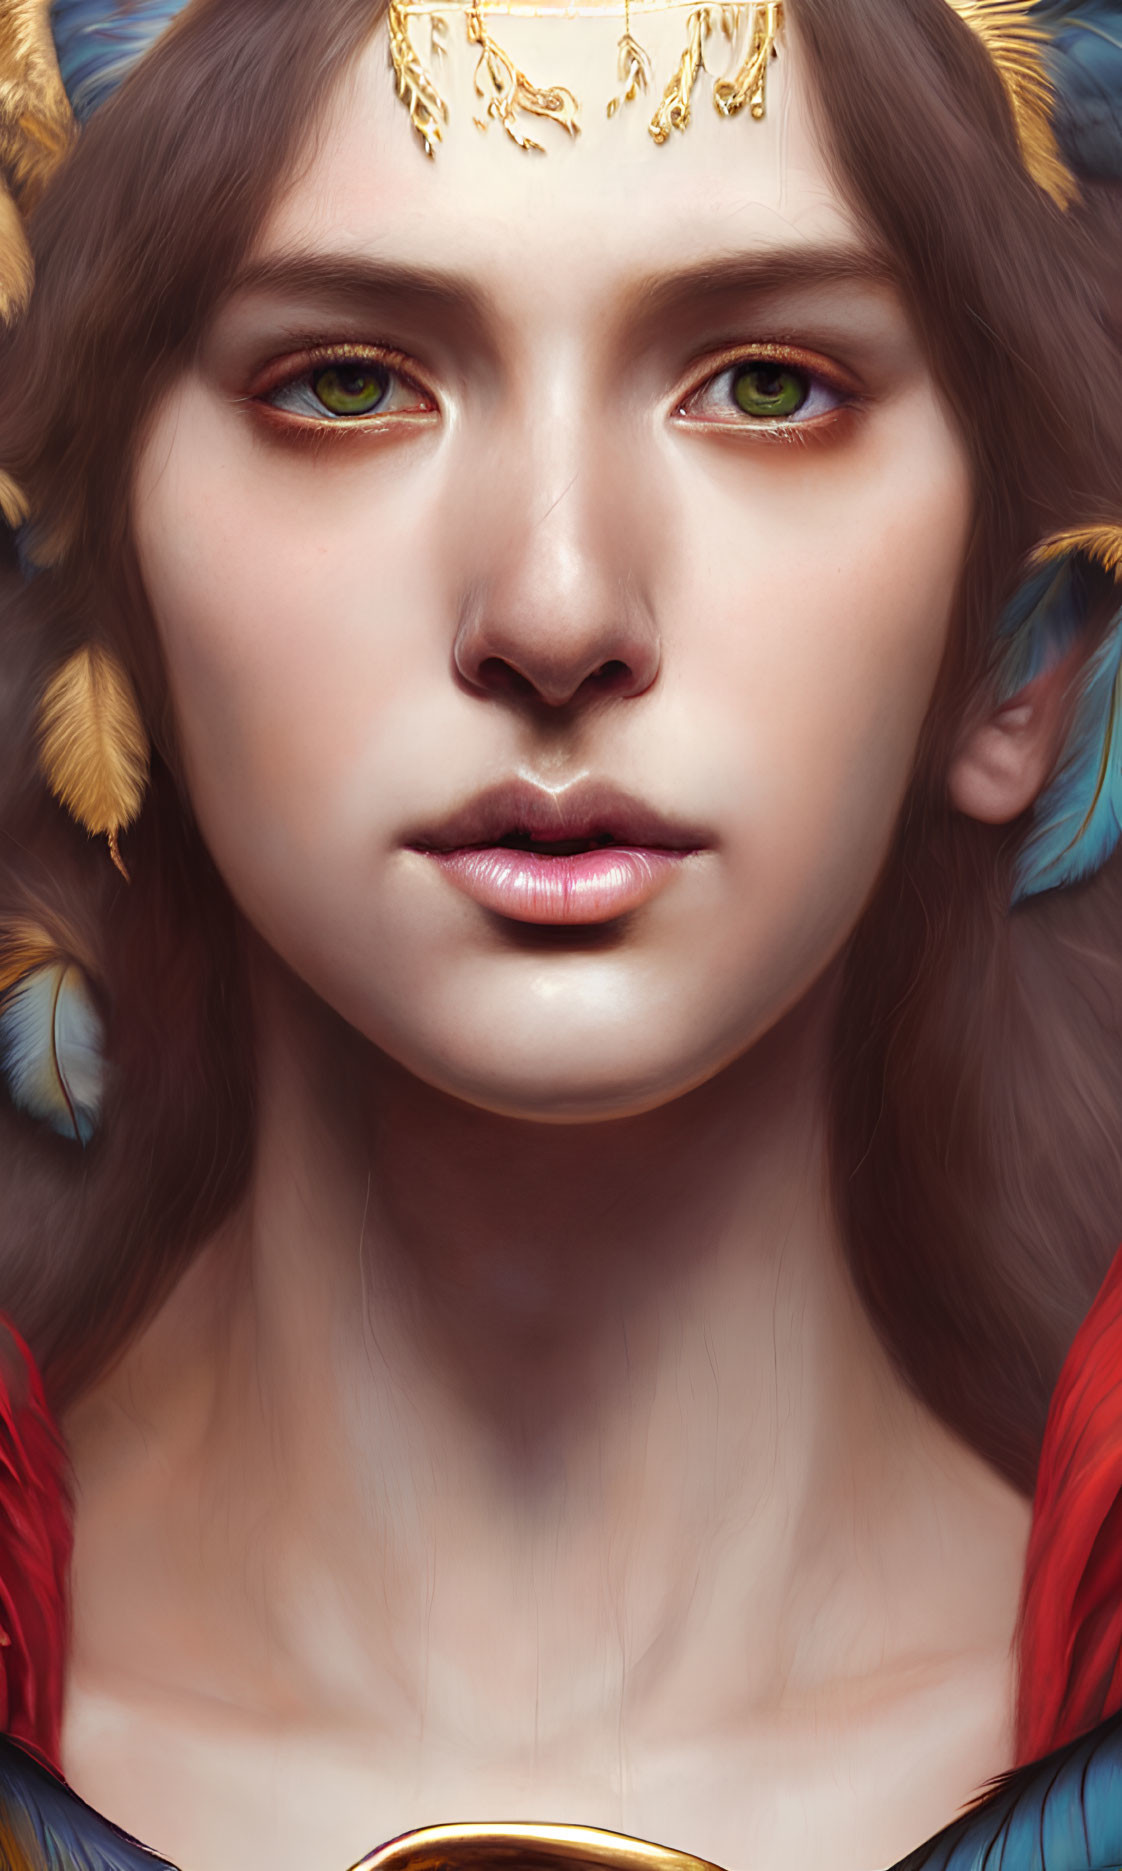 Digital painting of woman with green eyes, feathered adornments, and golden crown accent